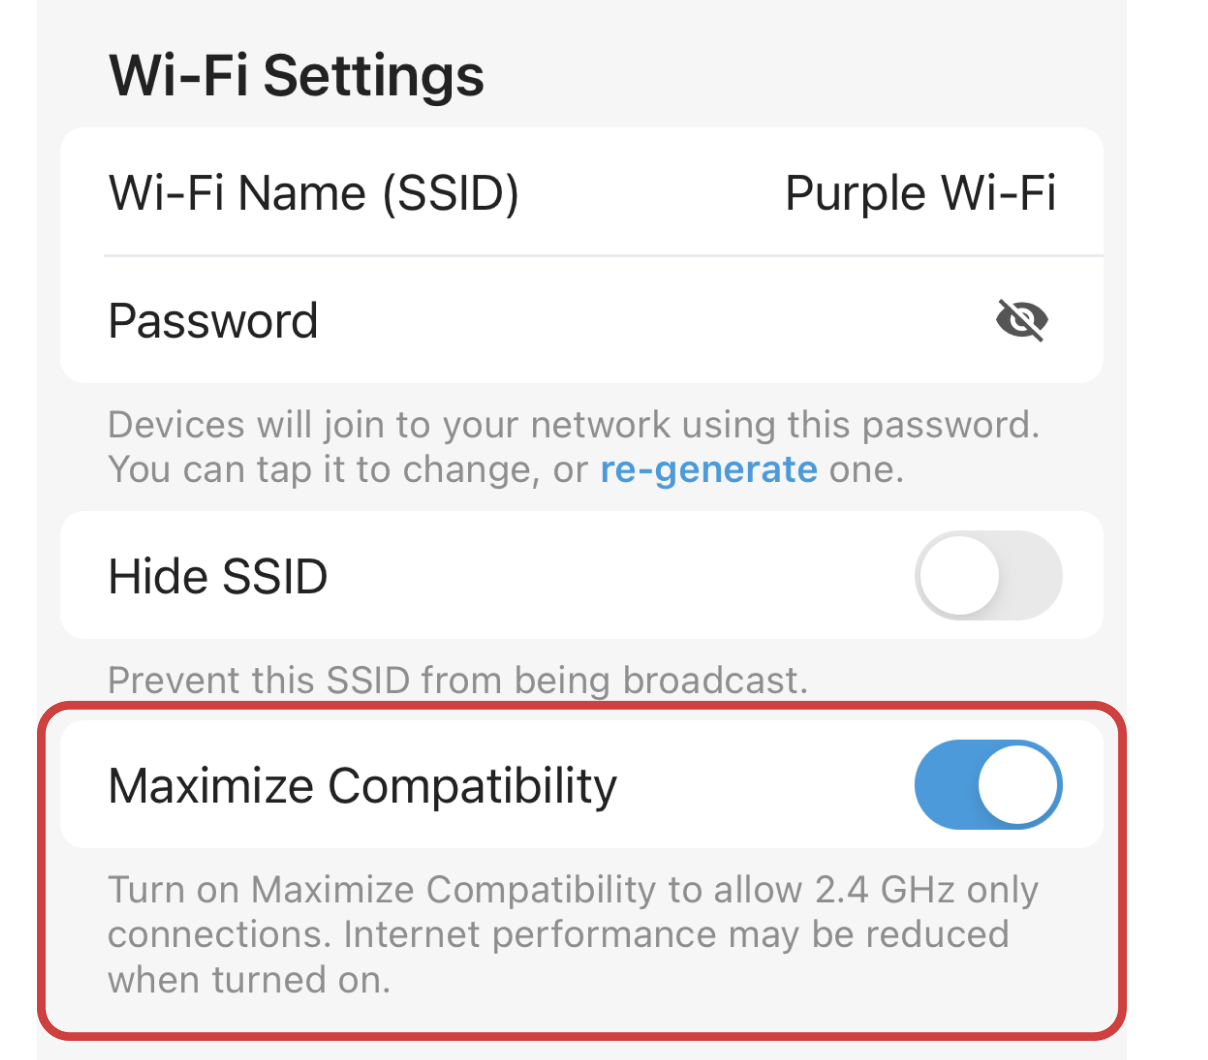 Firewalla Purple WIFI can select maximize compatibility to allow 2.4 GHz-only